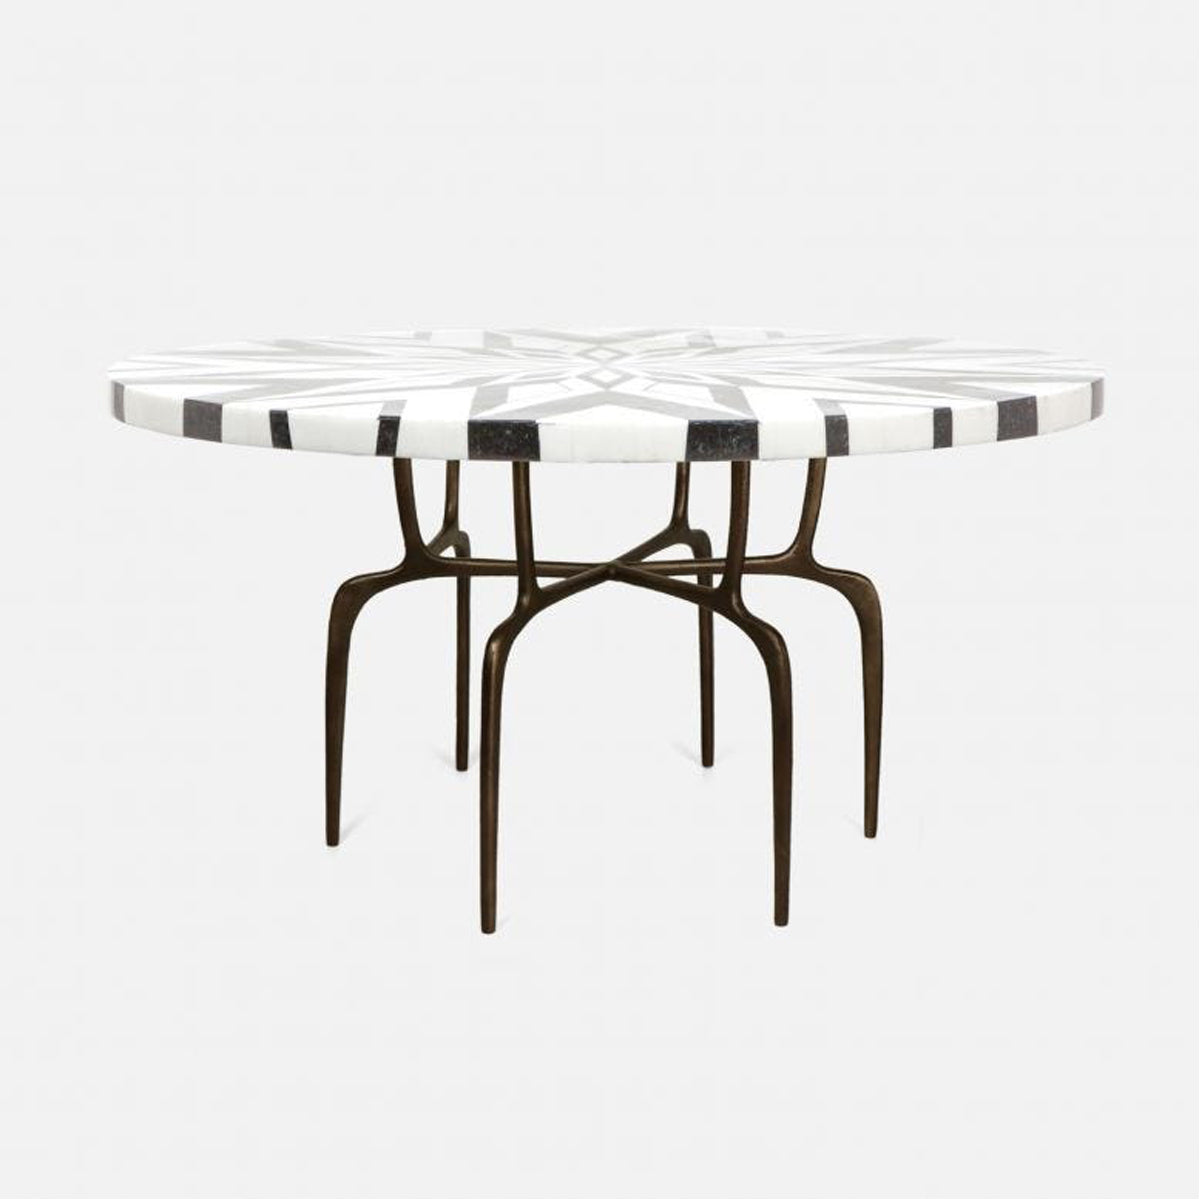 Made Goods Cyrano Metal Dining Table in Black/White Geometric Marble